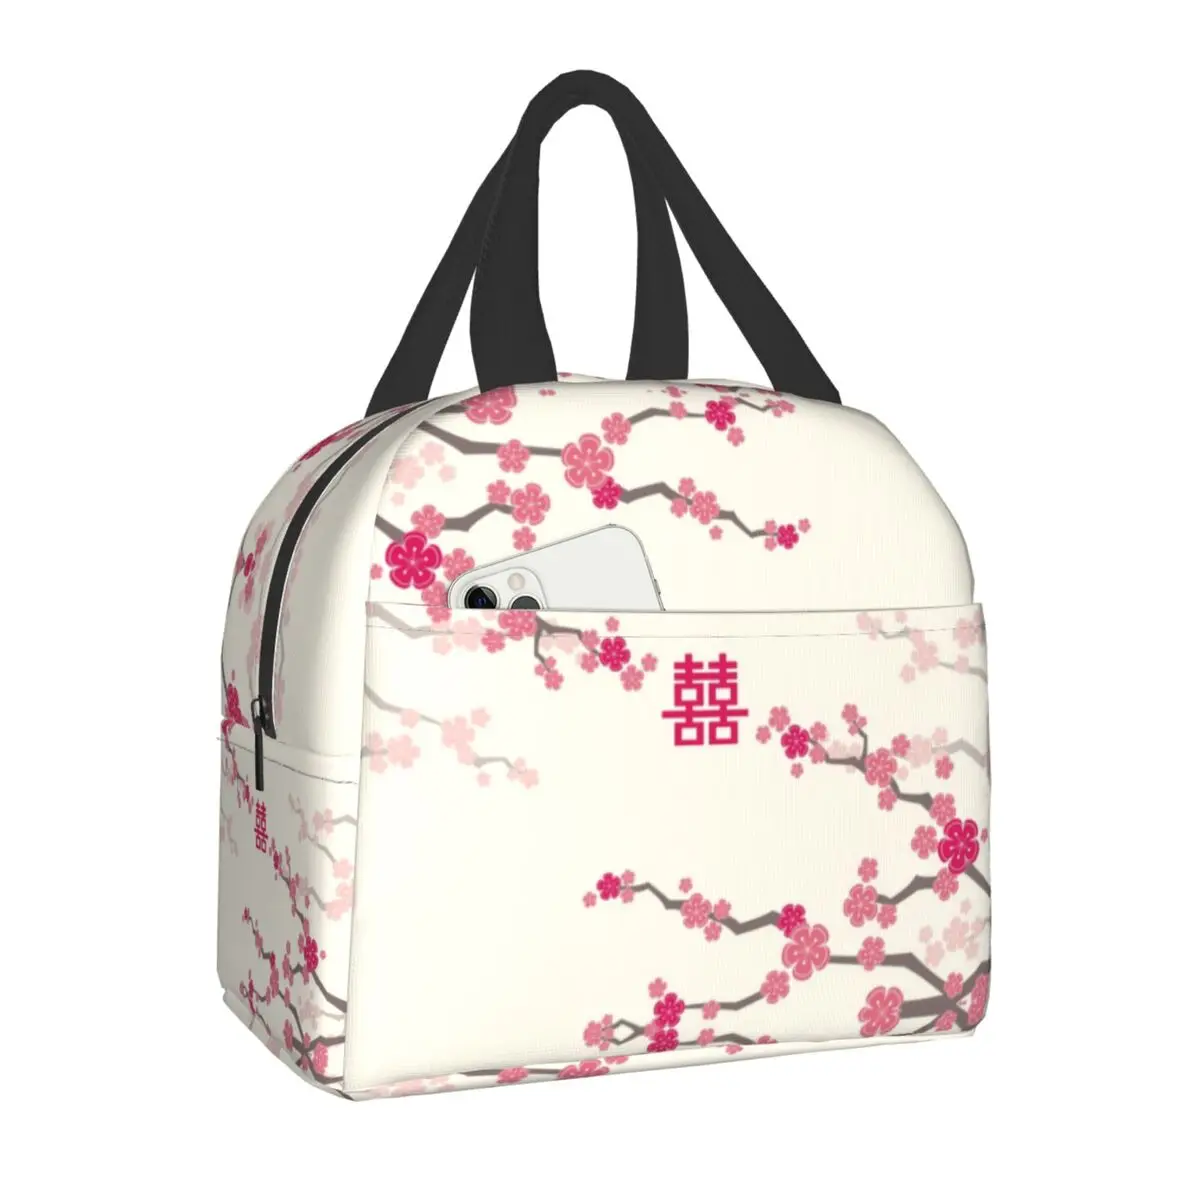 Japanese Sakura Cherry Blossoms Insulated Lunch Bags for Women Resuable Thermal Cooler Flowers Bento Box Kids School Children